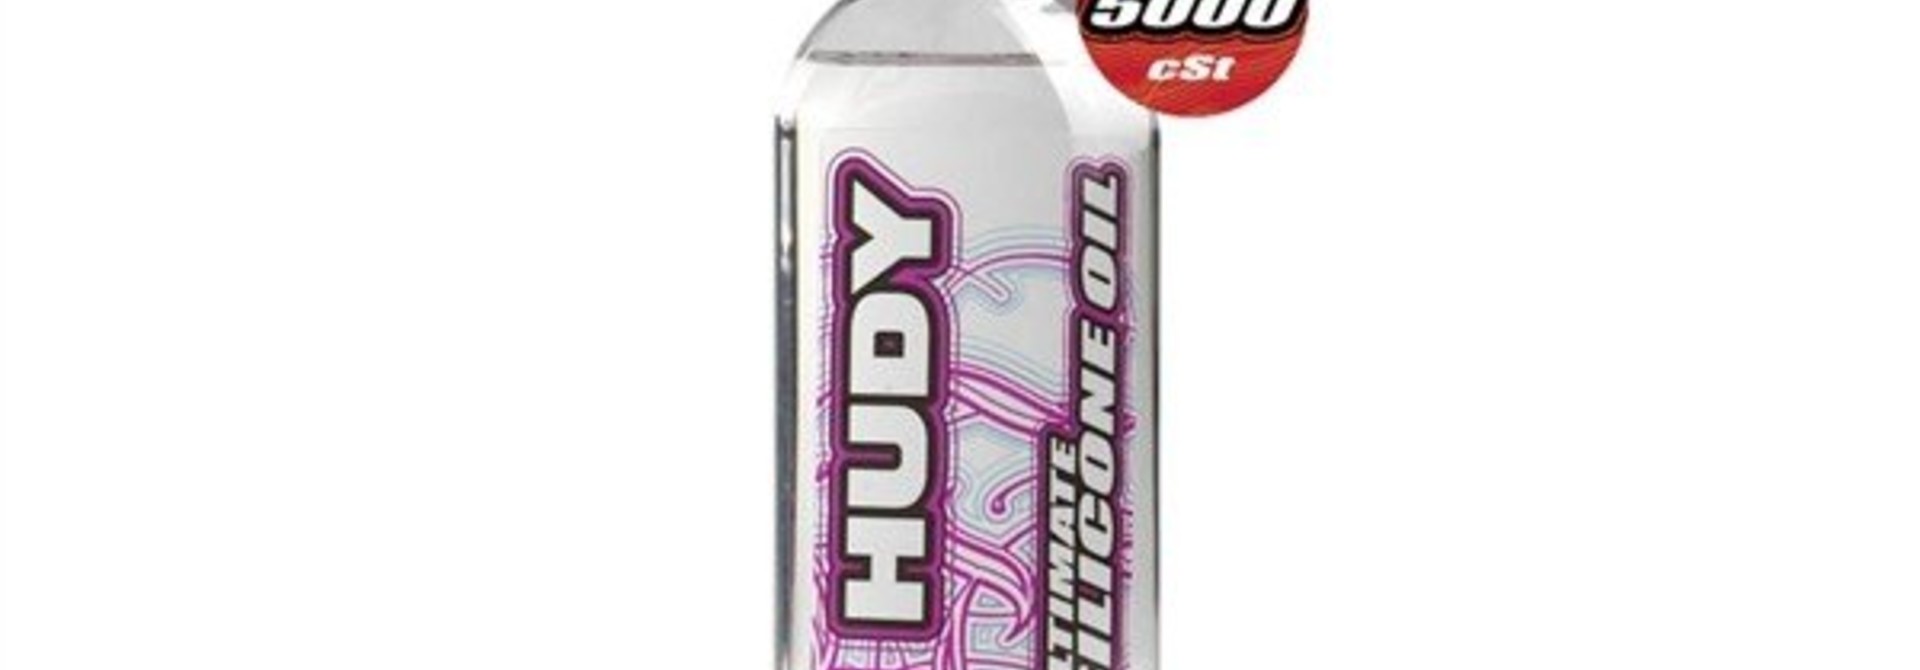 HUDY ULTIMATE SILICONE OIL 5000 cSt - 100ML. H106451